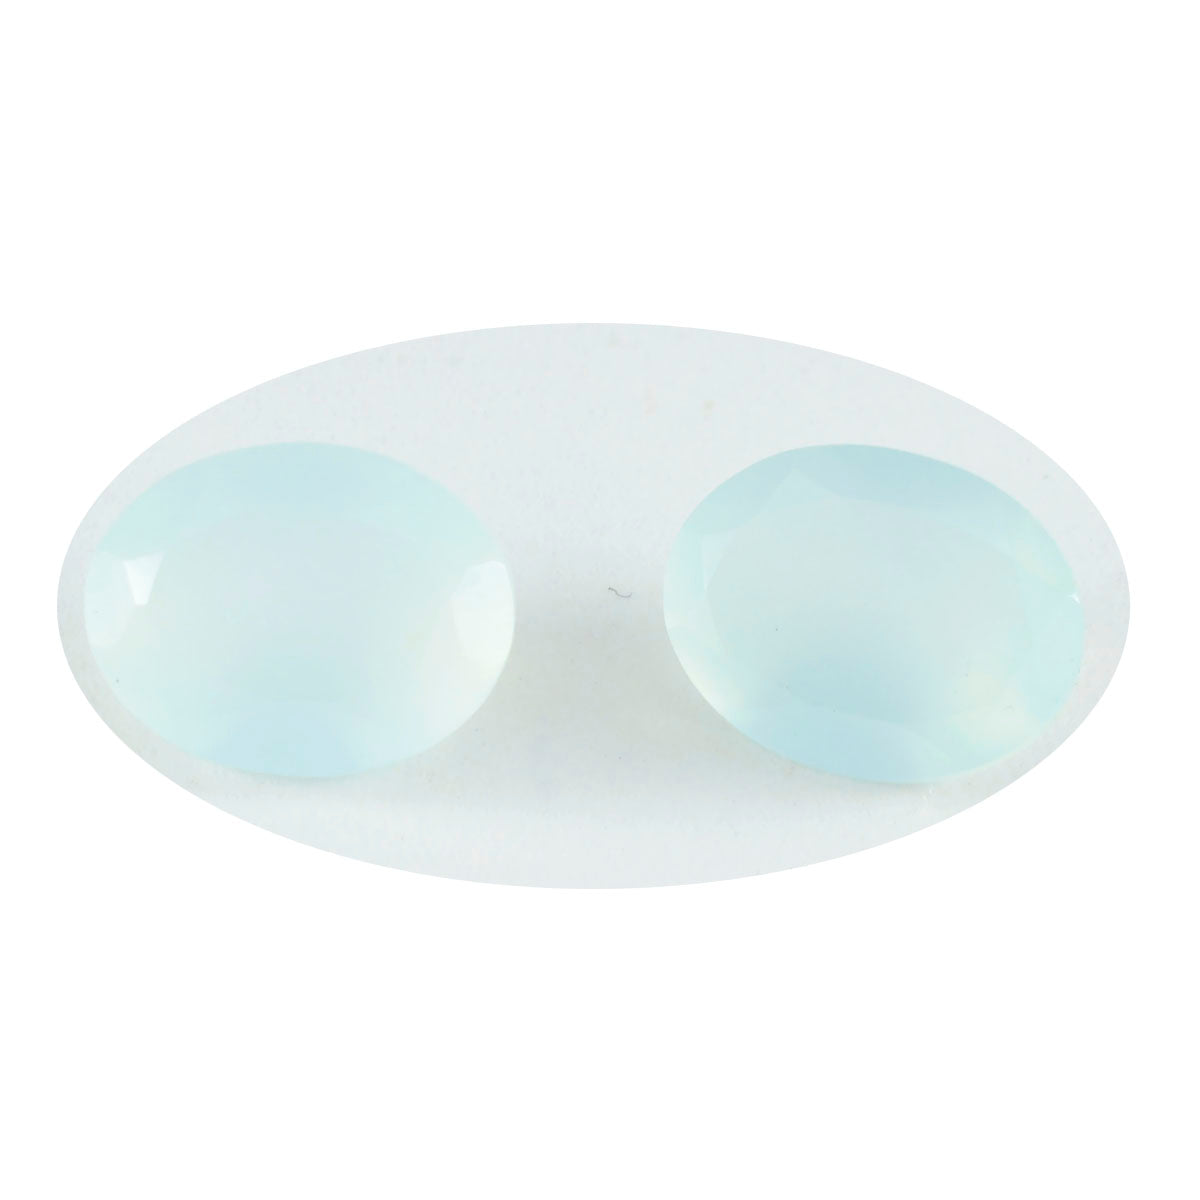 Riyogems 1PC Real Aqua Chalcedony Faceted 10x14 mm Oval Shape lovely Quality Loose Stone